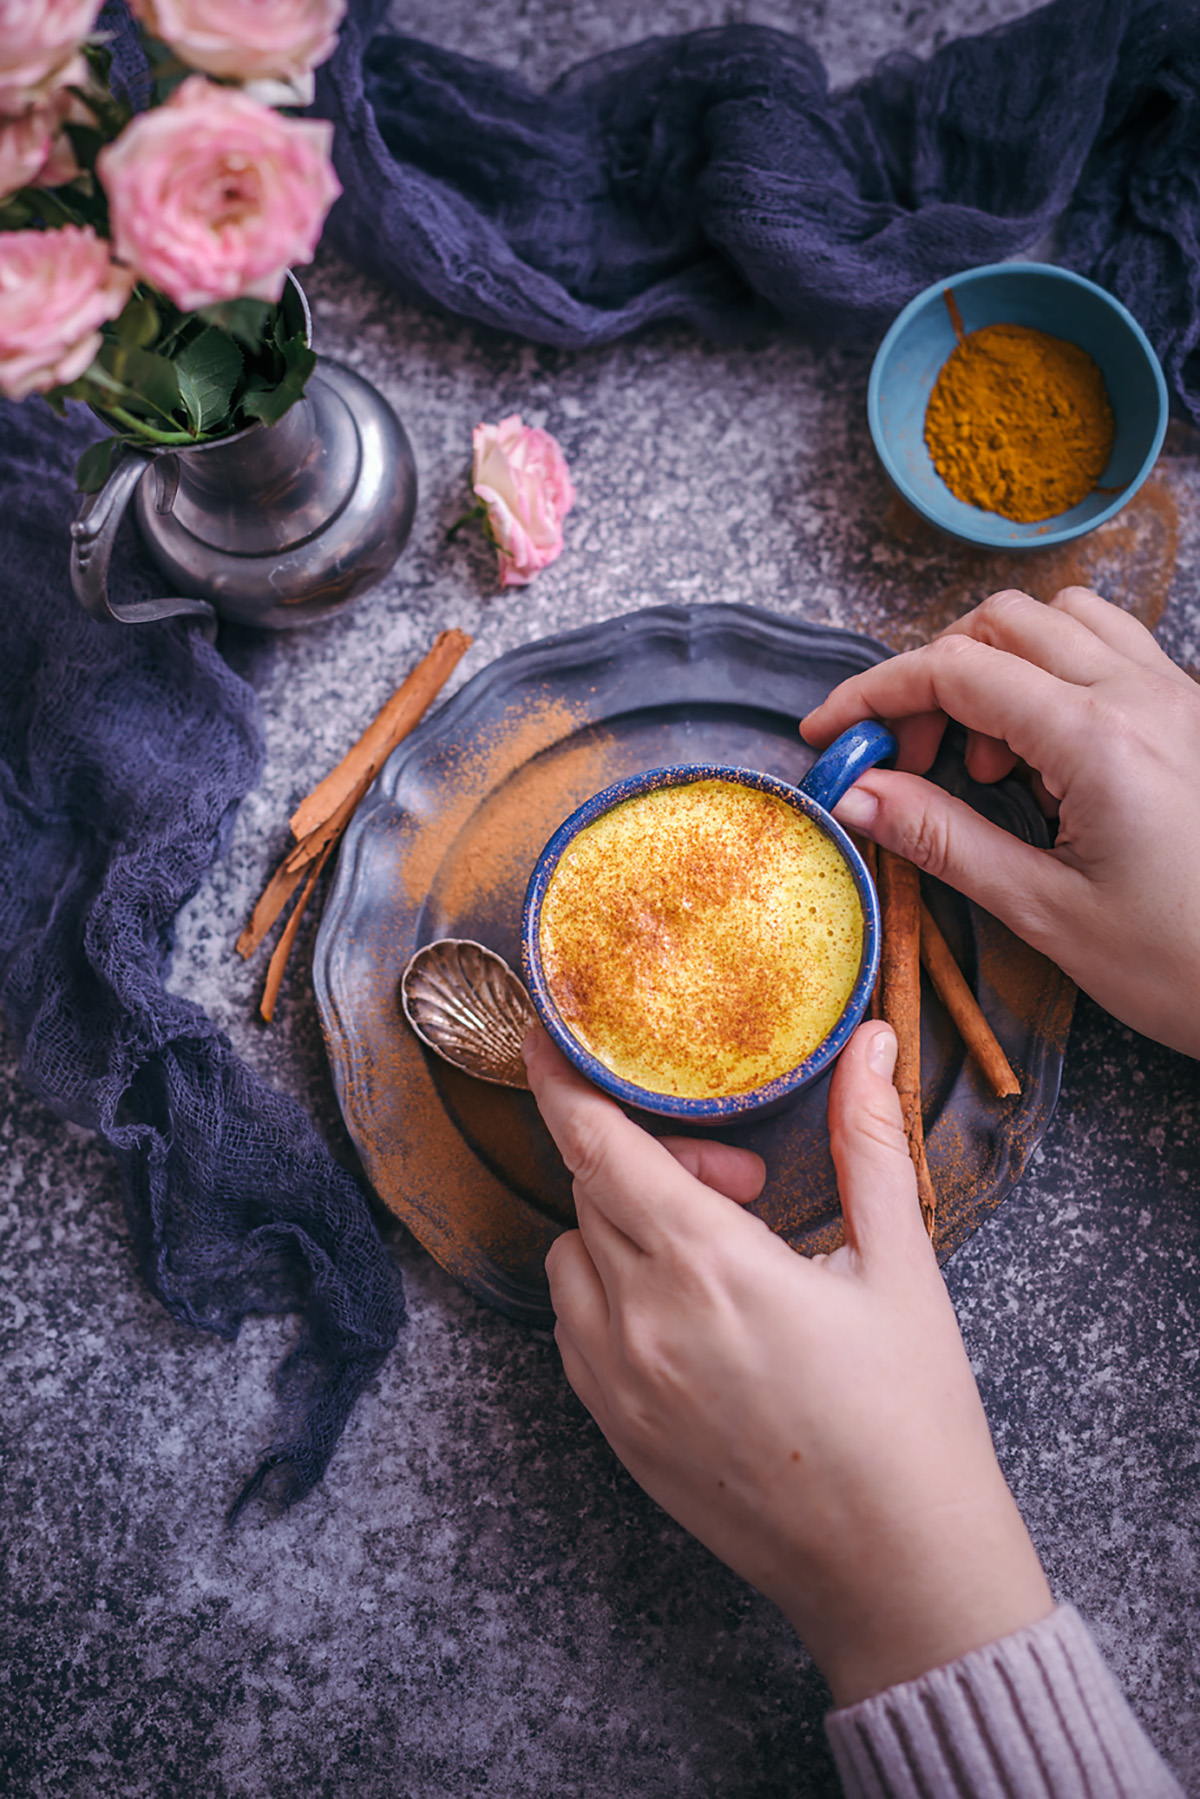 Golden milk turmeric latte (very healthy, delicious and comforting!)